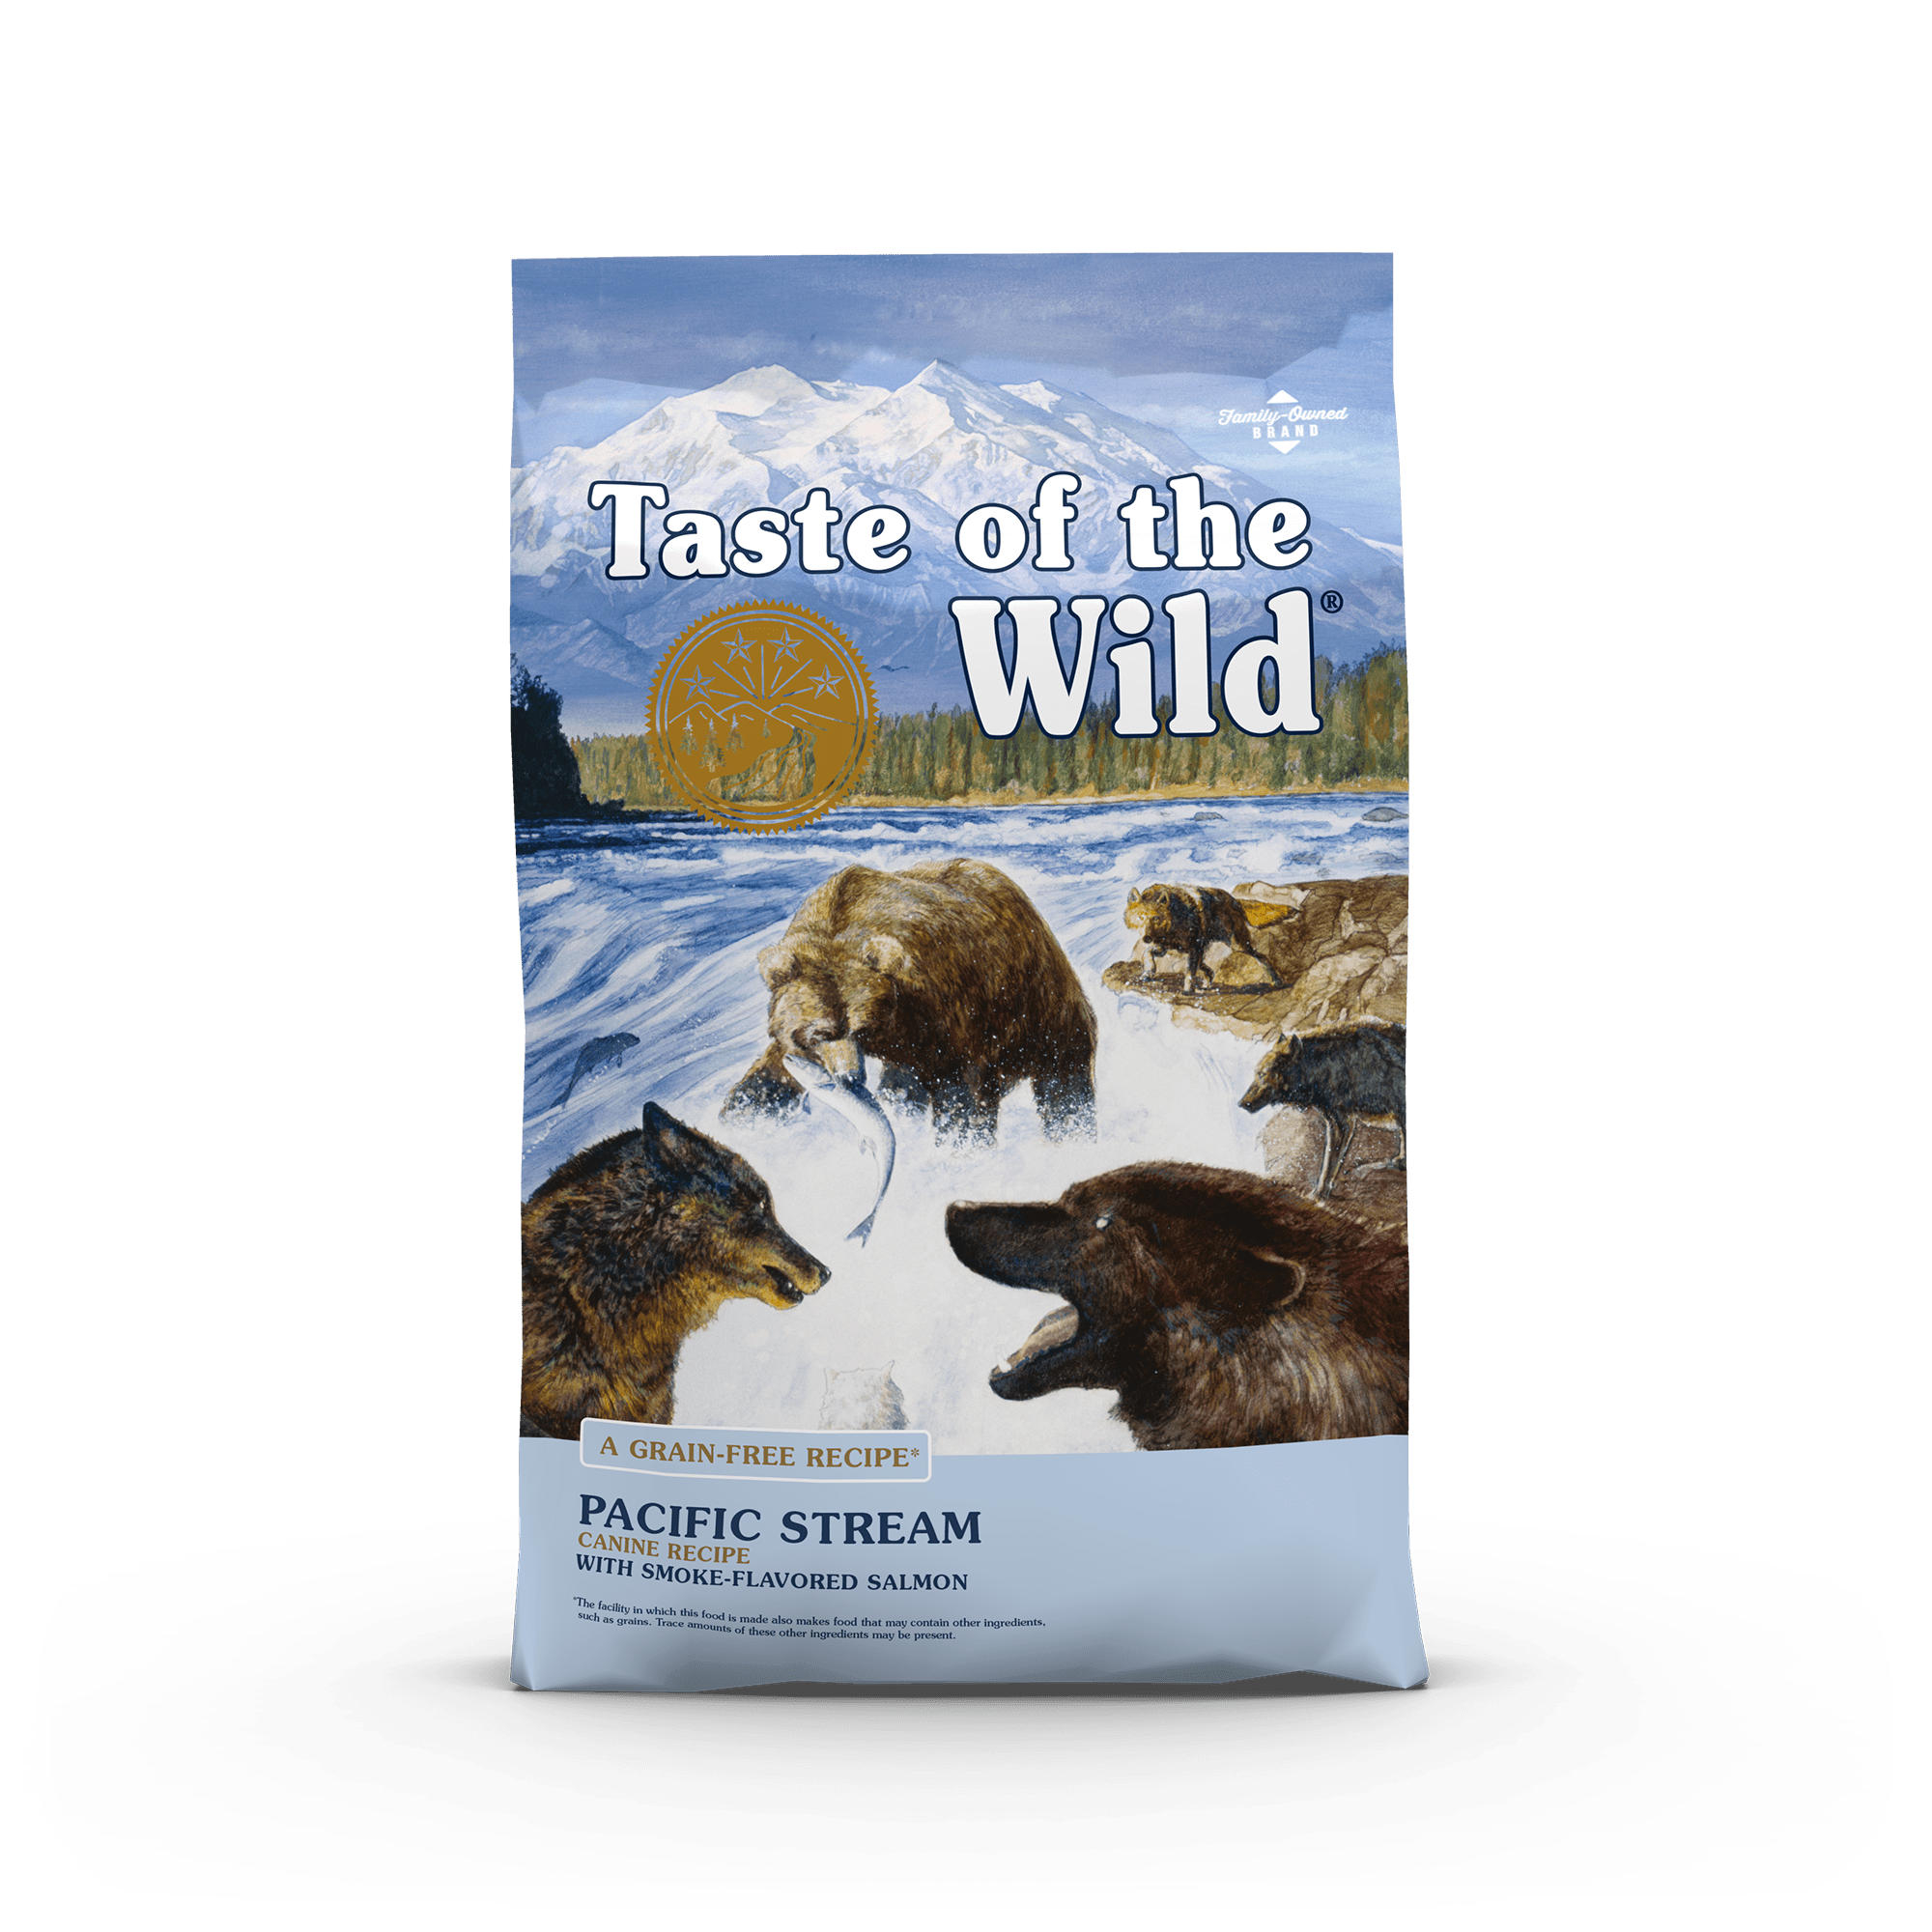 Taste of the Wild Grain-Free Pacific Stream Canine Recipe with Smoke-Flavored Salmon package